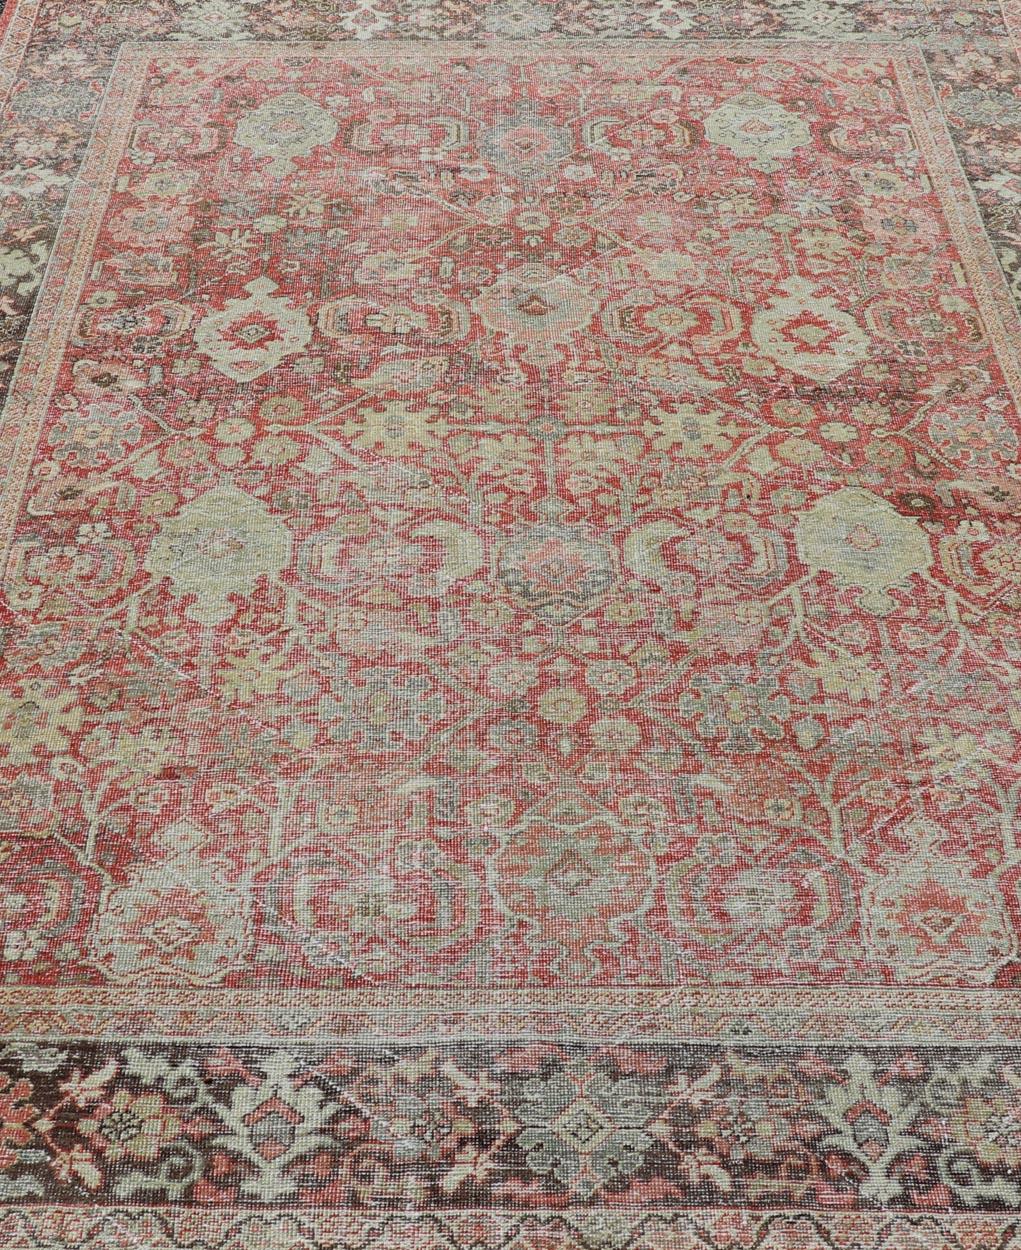 Antique Persian Colorful Mahal Rug with All over Floral Design on a Red Field  For Sale 2